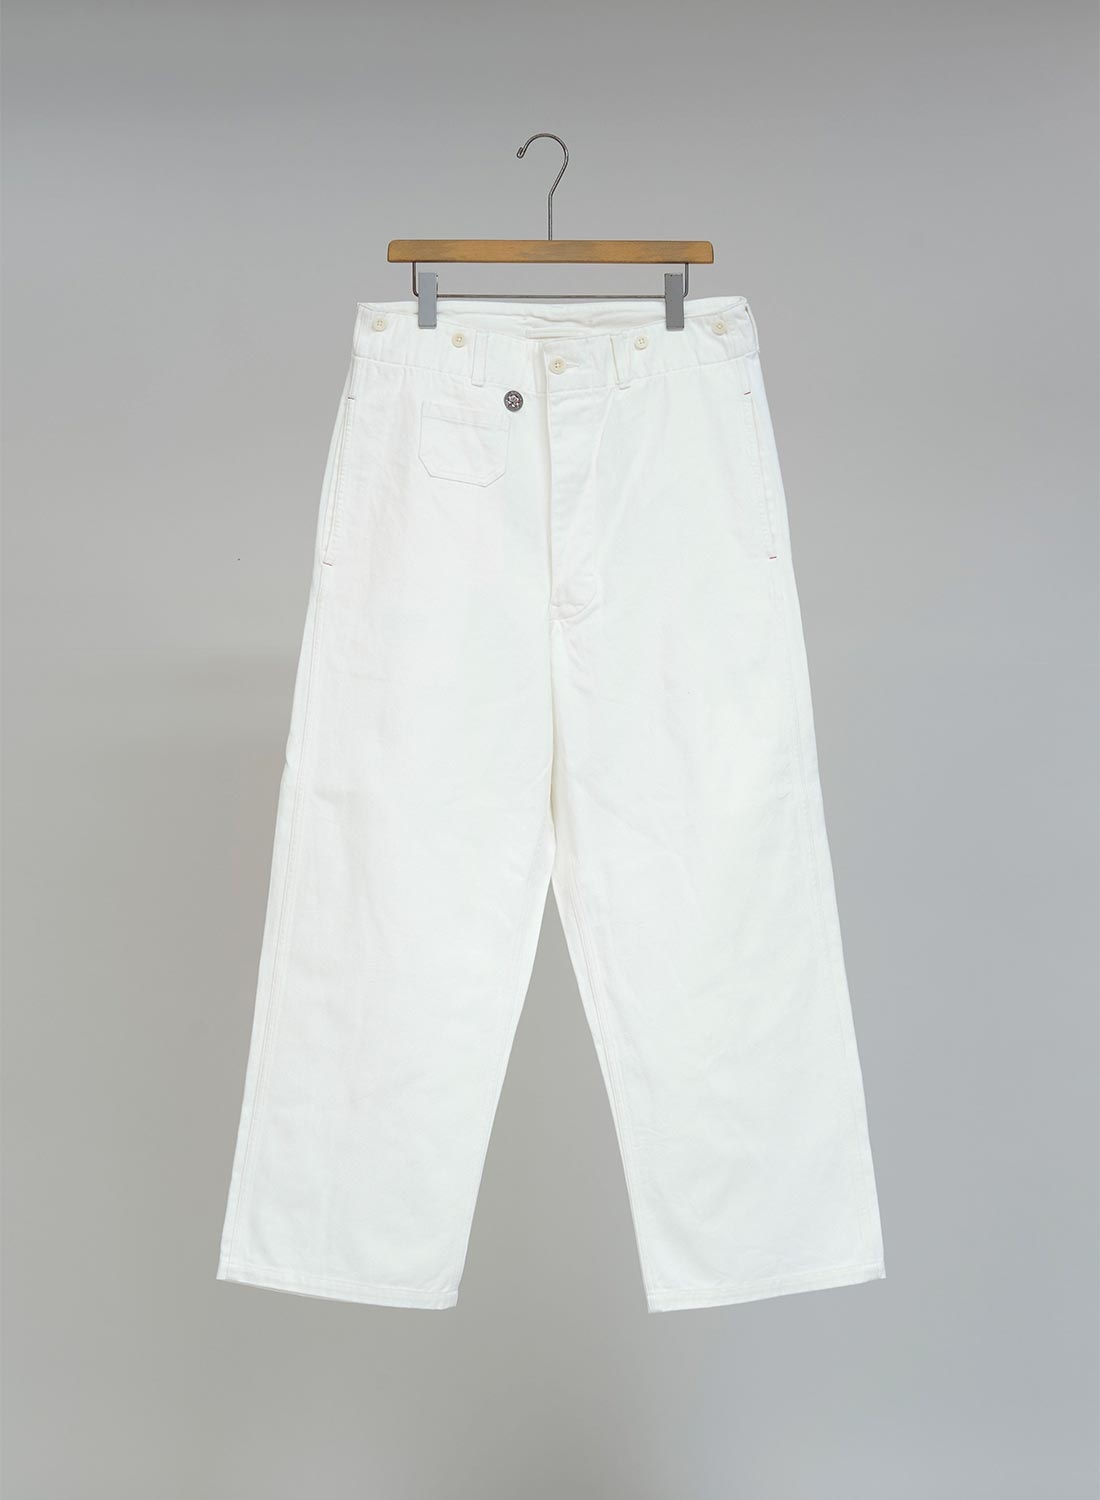 CC22 Utility Pant in Off White - 1